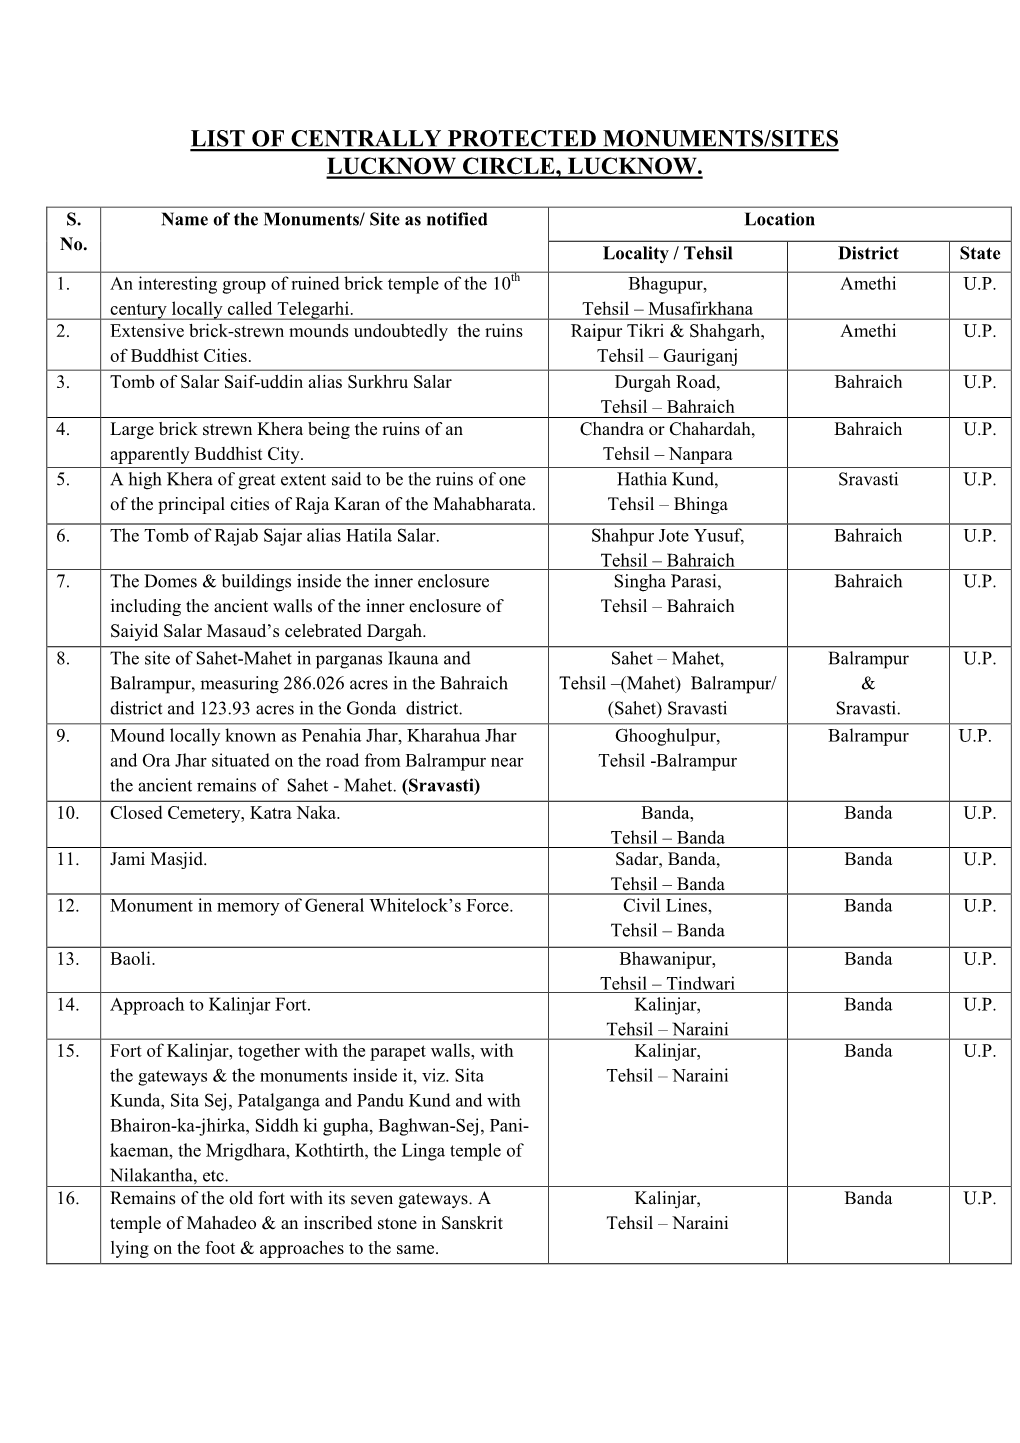 List of Centrally Protected Monuments/Sites Lucknow Circle, Lucknow